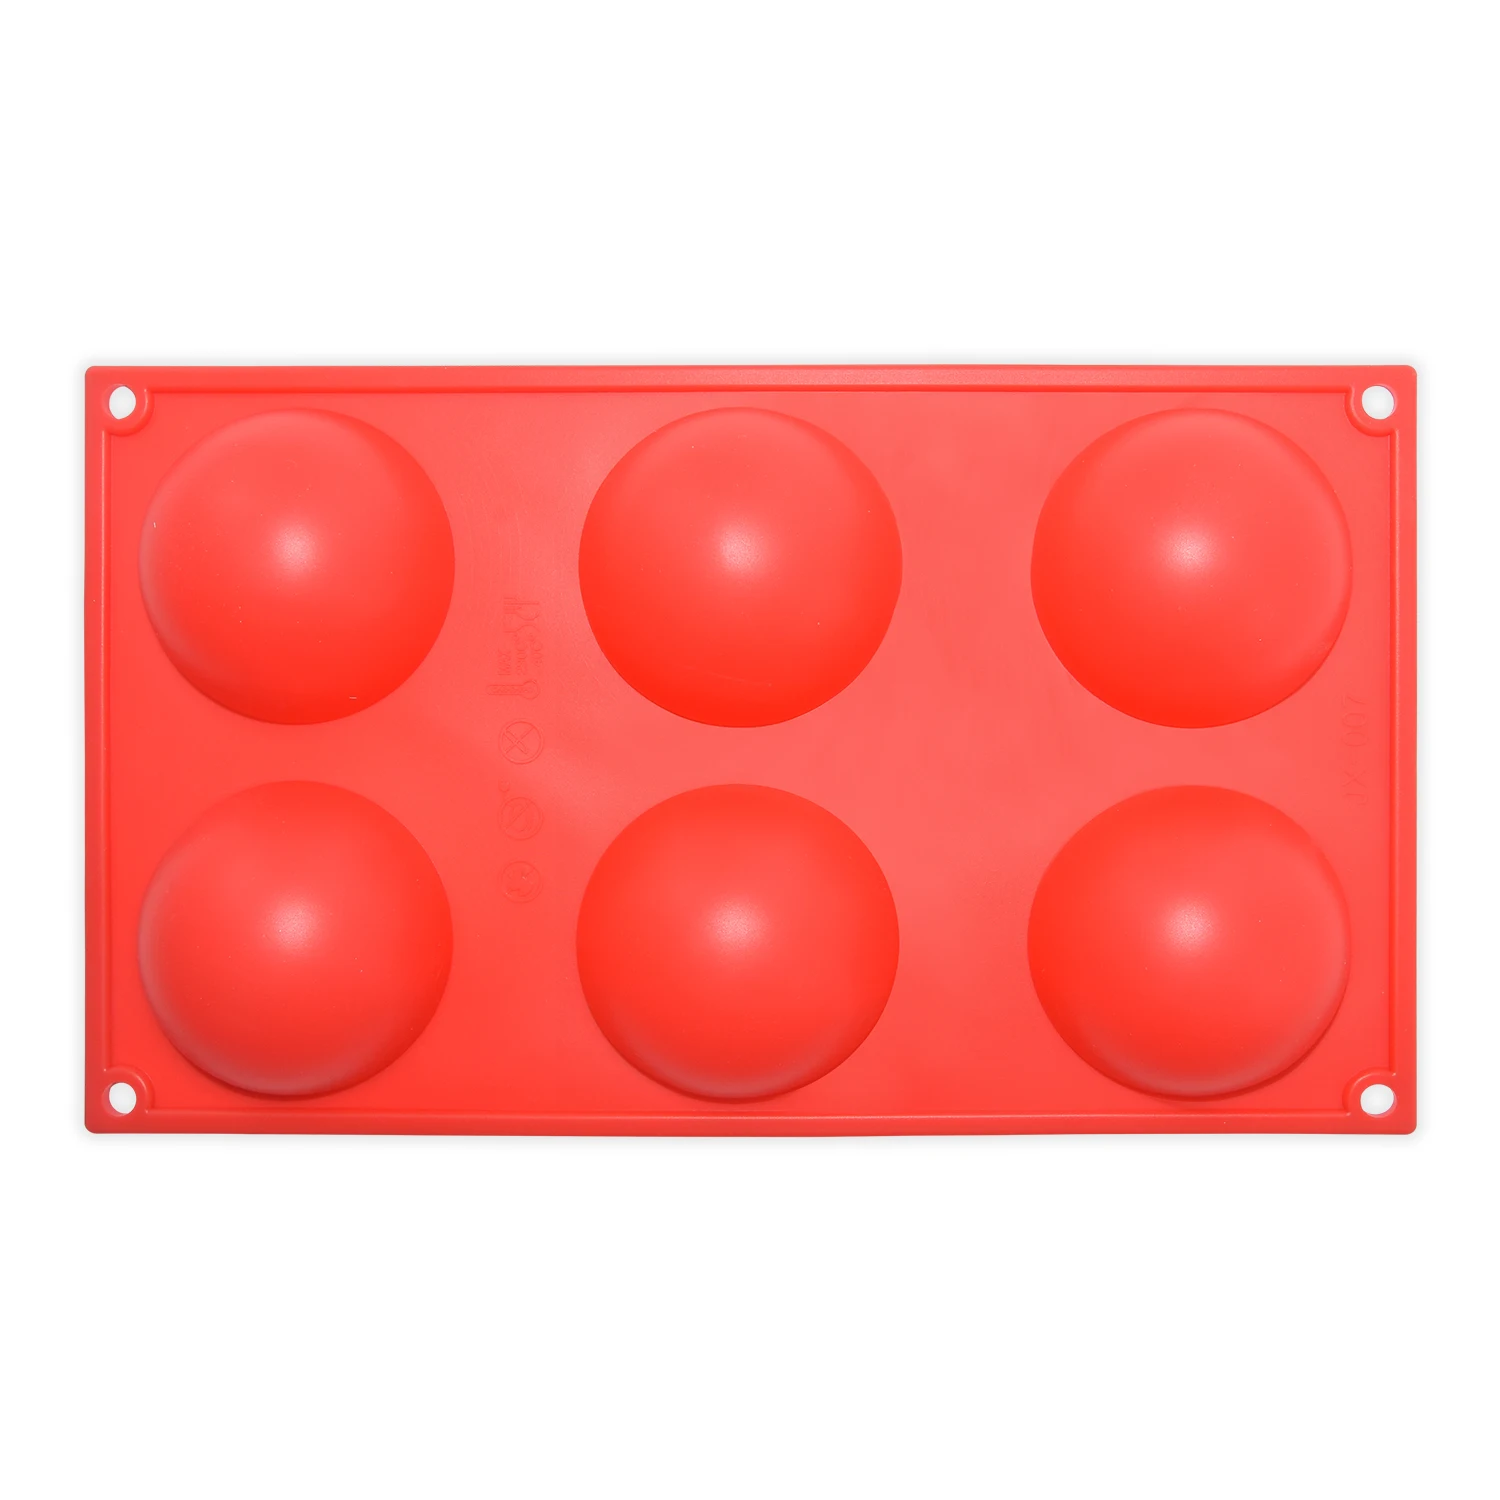 BHD 6 Holes Half Sphere Silicone Baking Molds,Silicone DIY Semi Sphere Silicone Mold,Baking Silicone Cake Mold For Baking